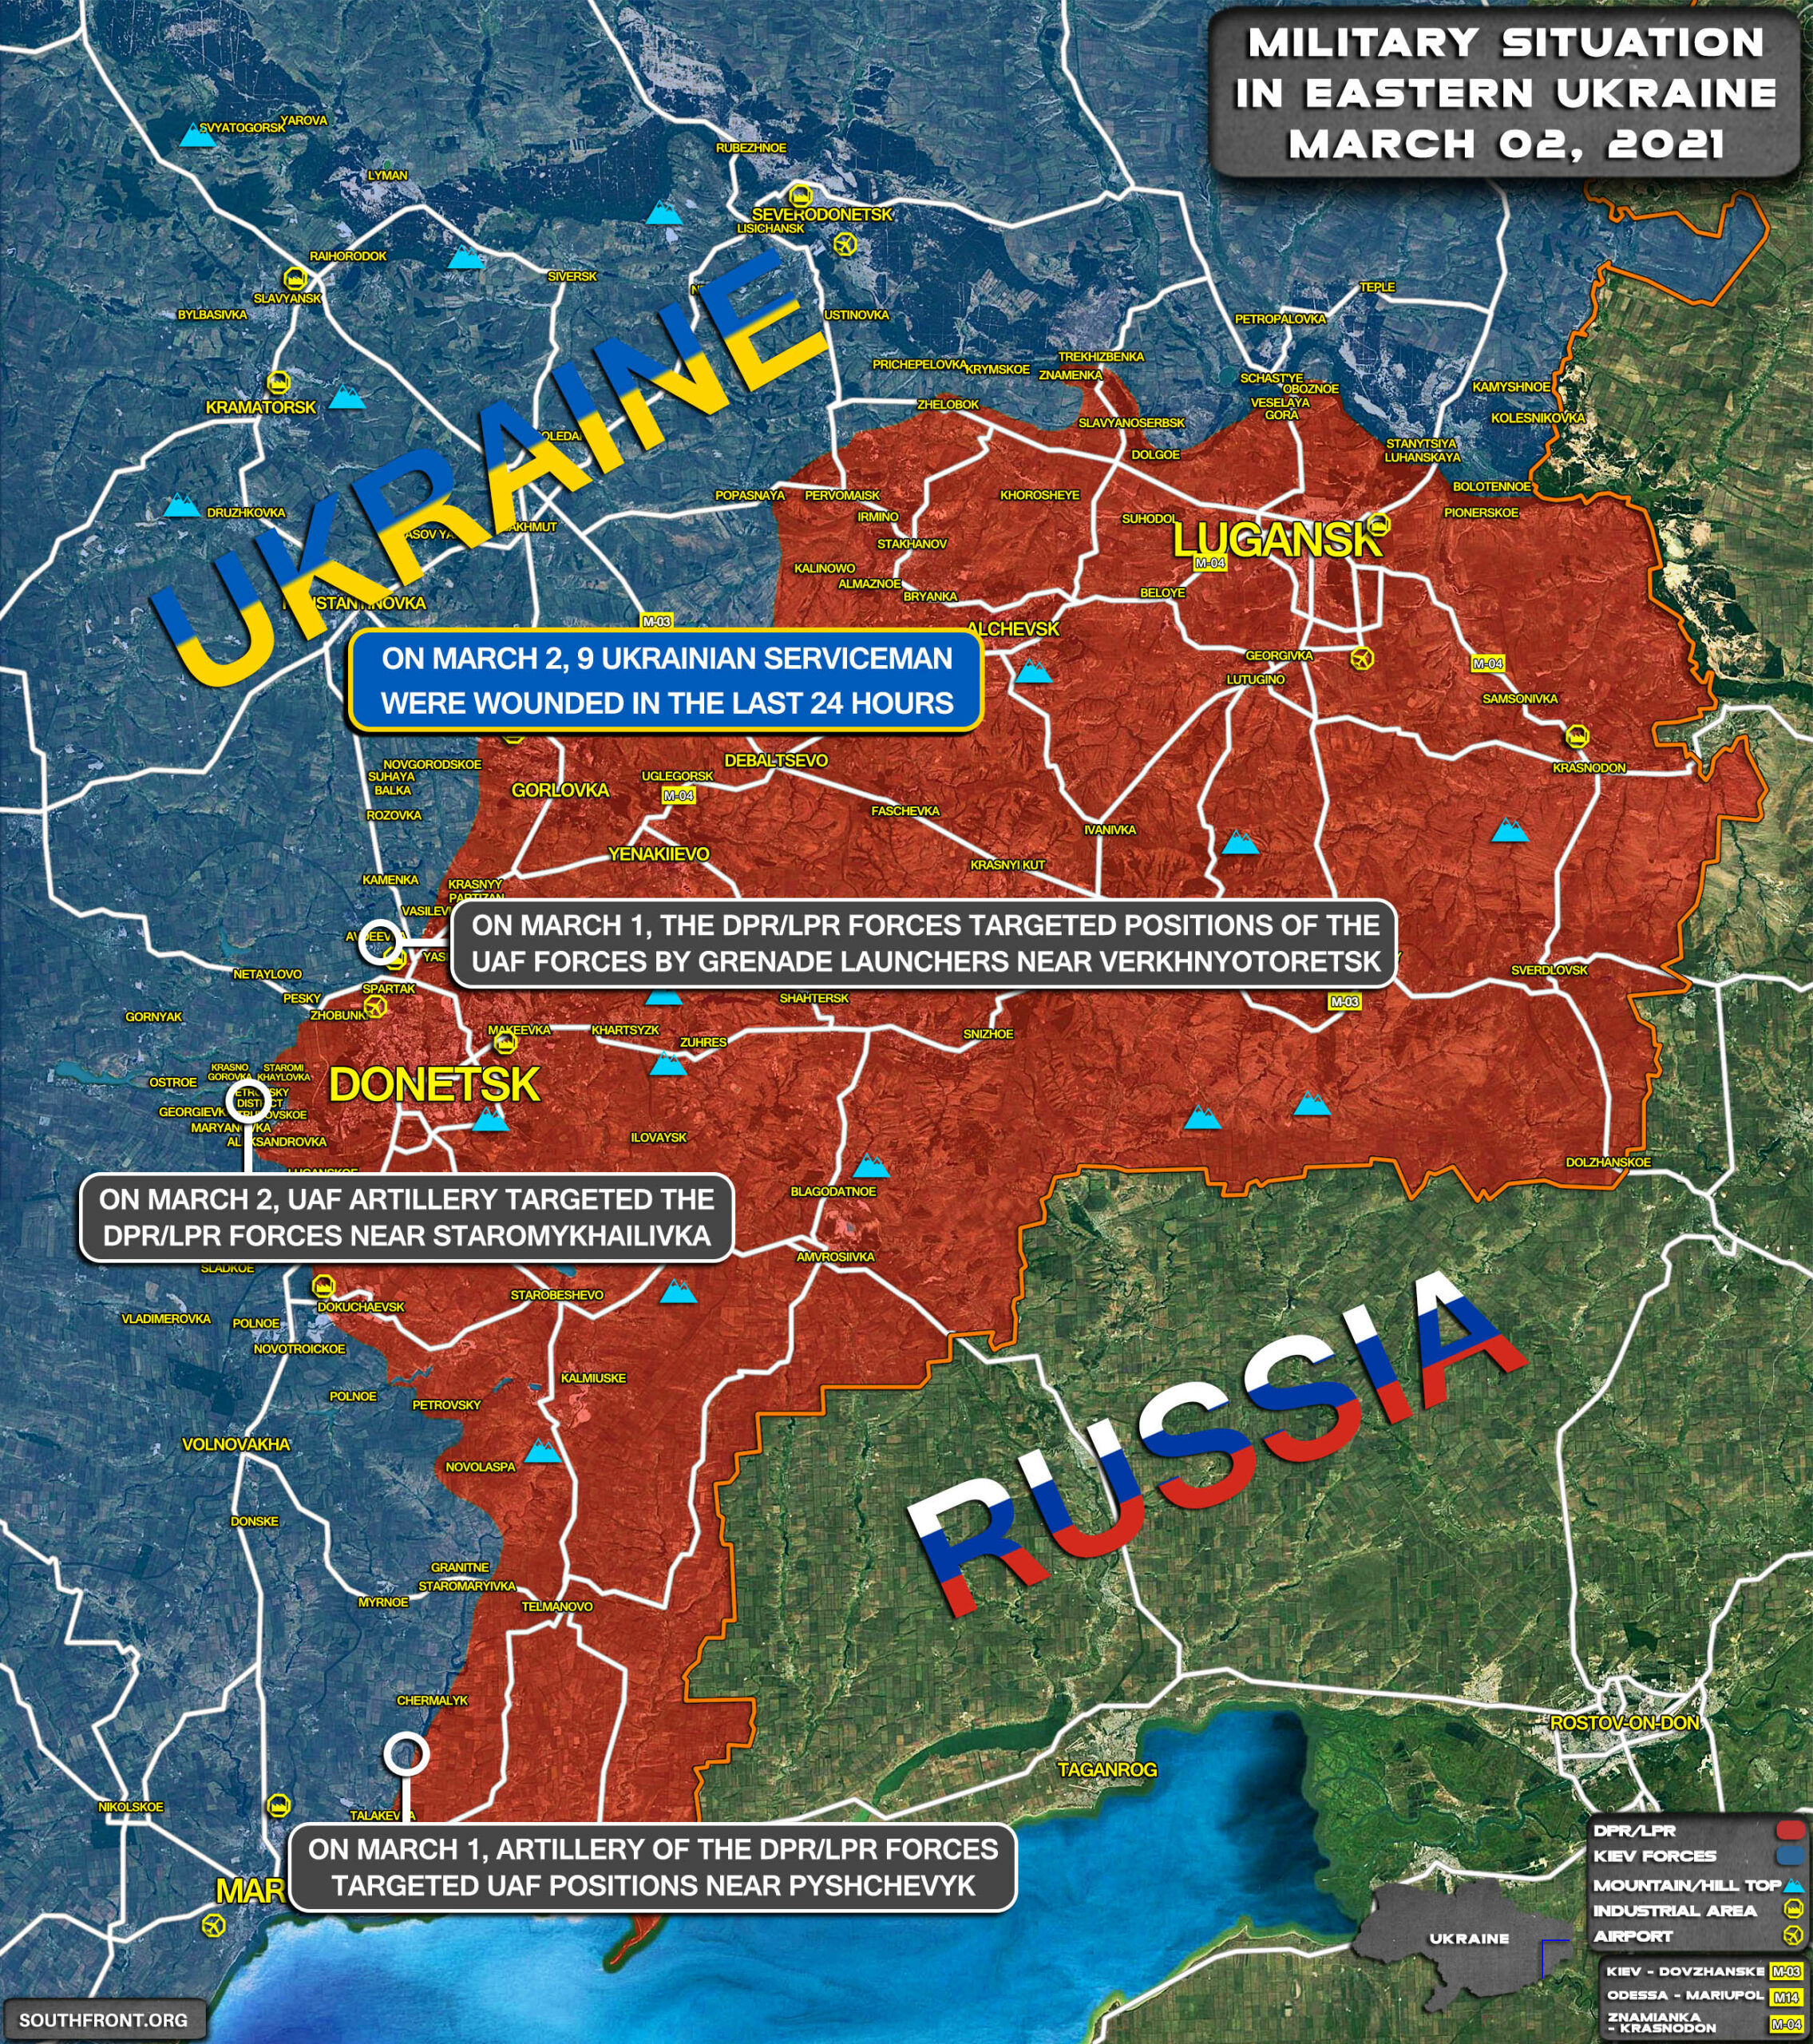 Kiev Continues Censoring Opposition, As Eastern Ukraine Escalation Nears Critical Mass